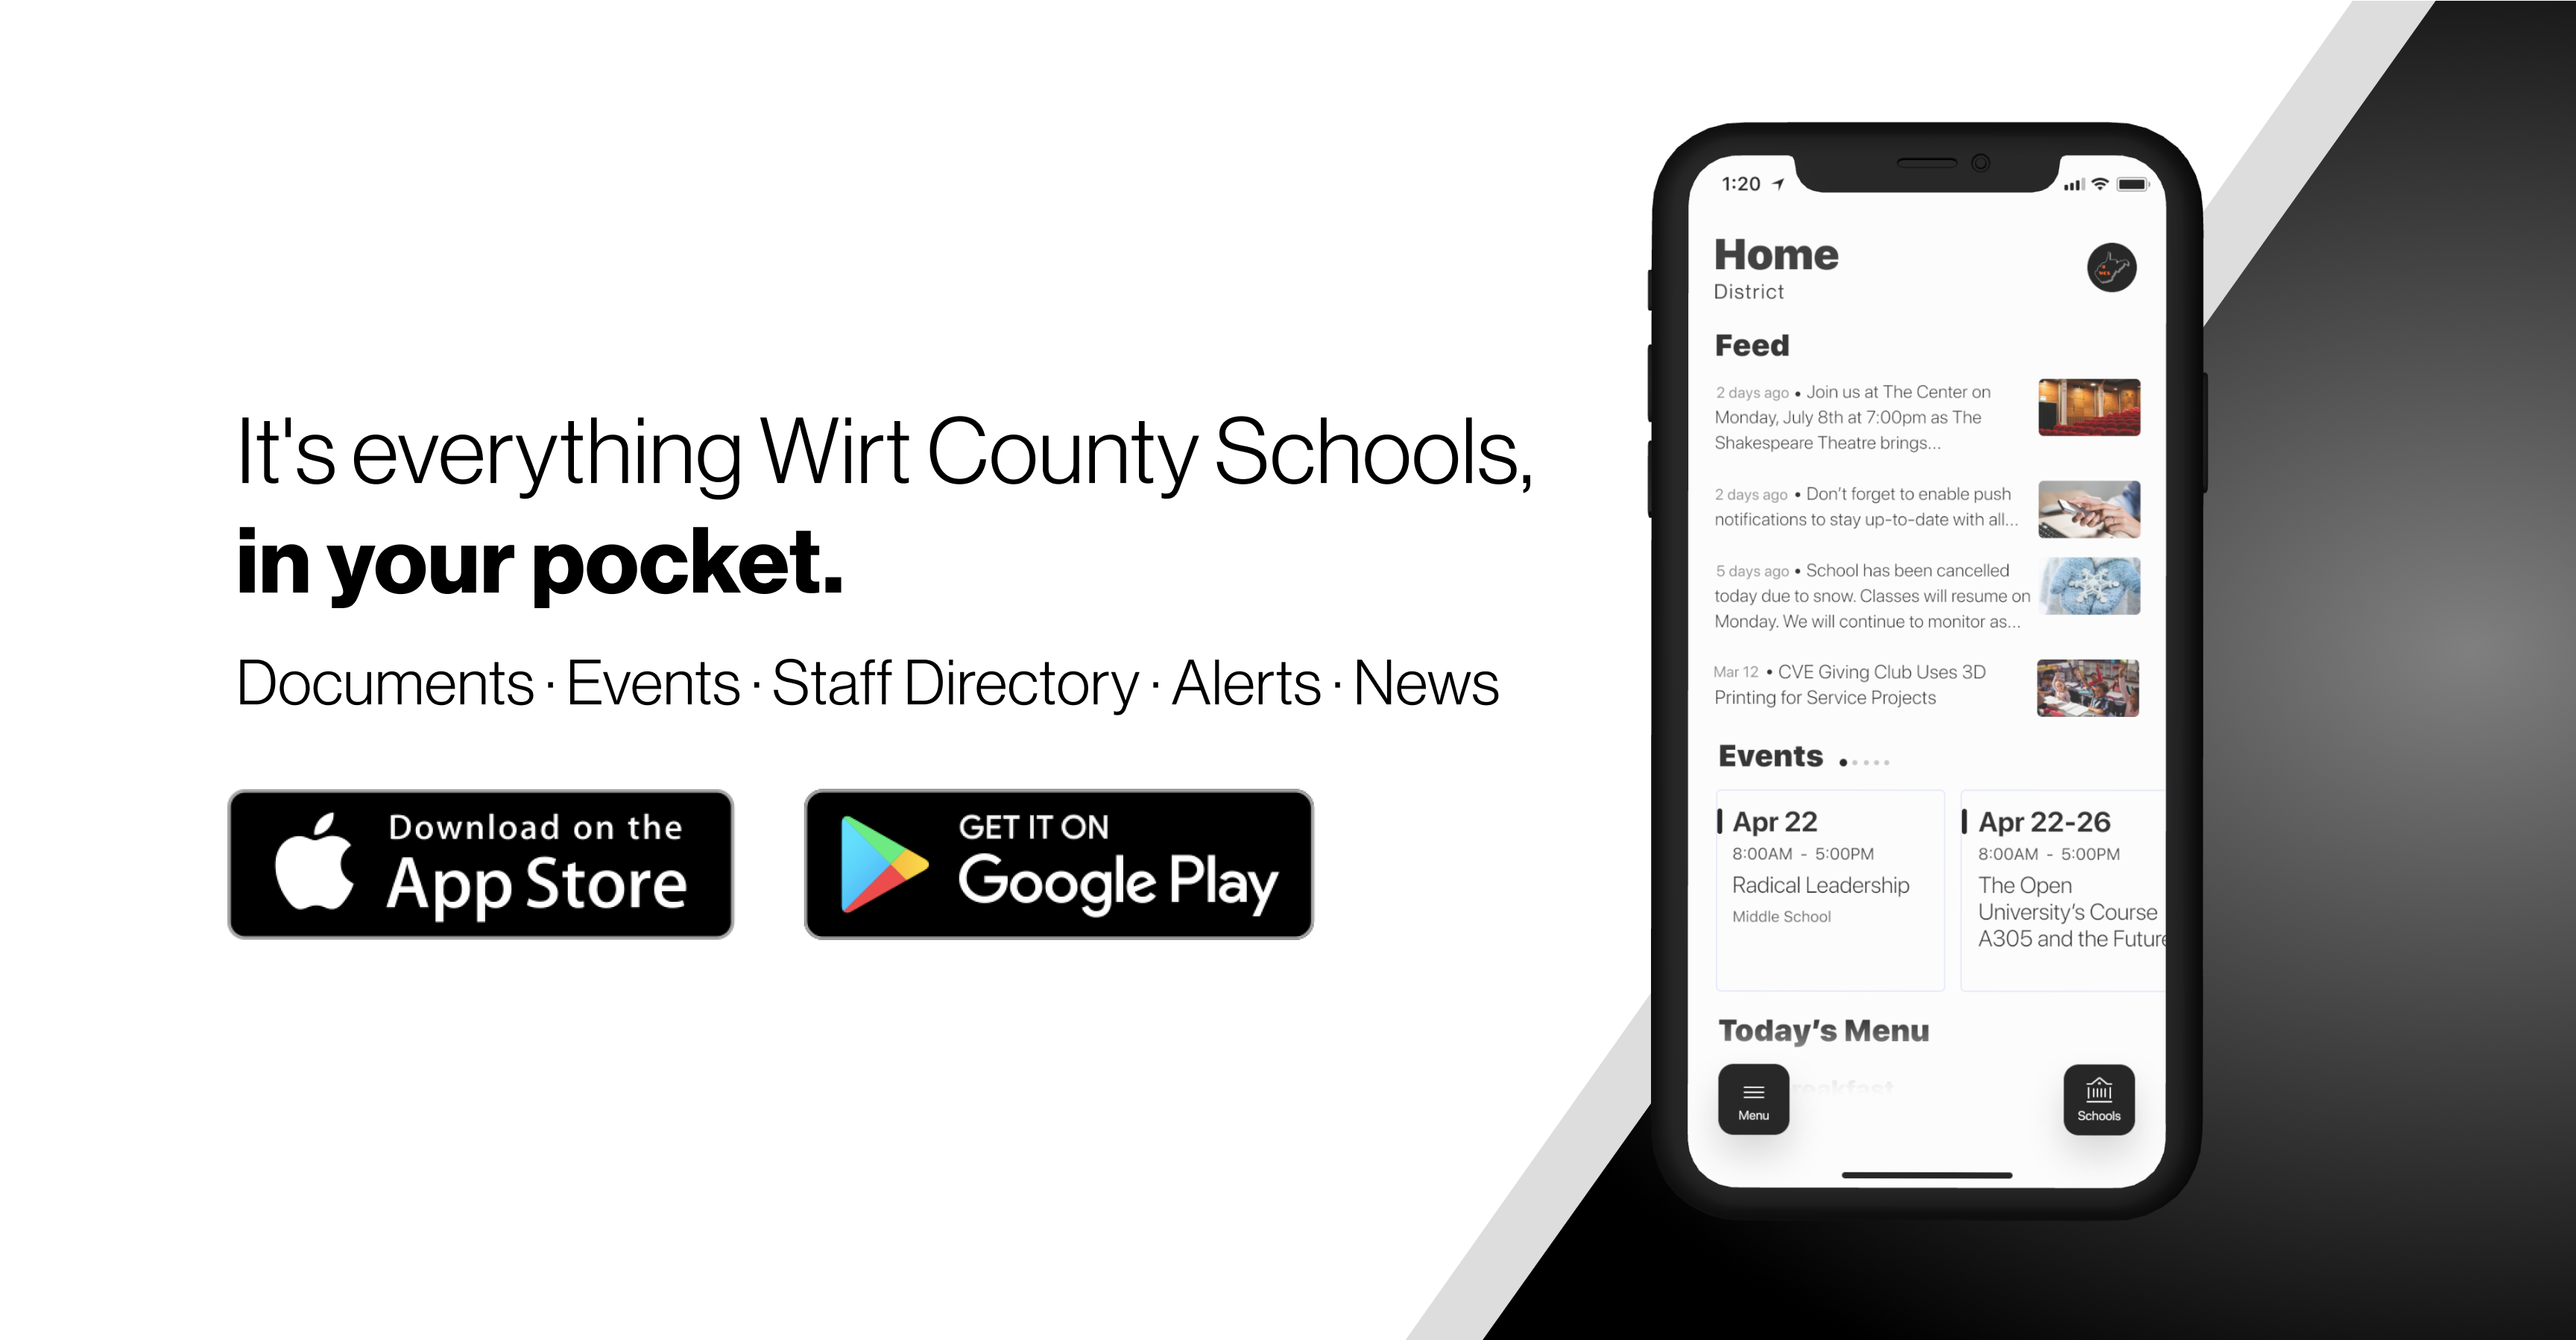 it's everything wirt county, in your pocket